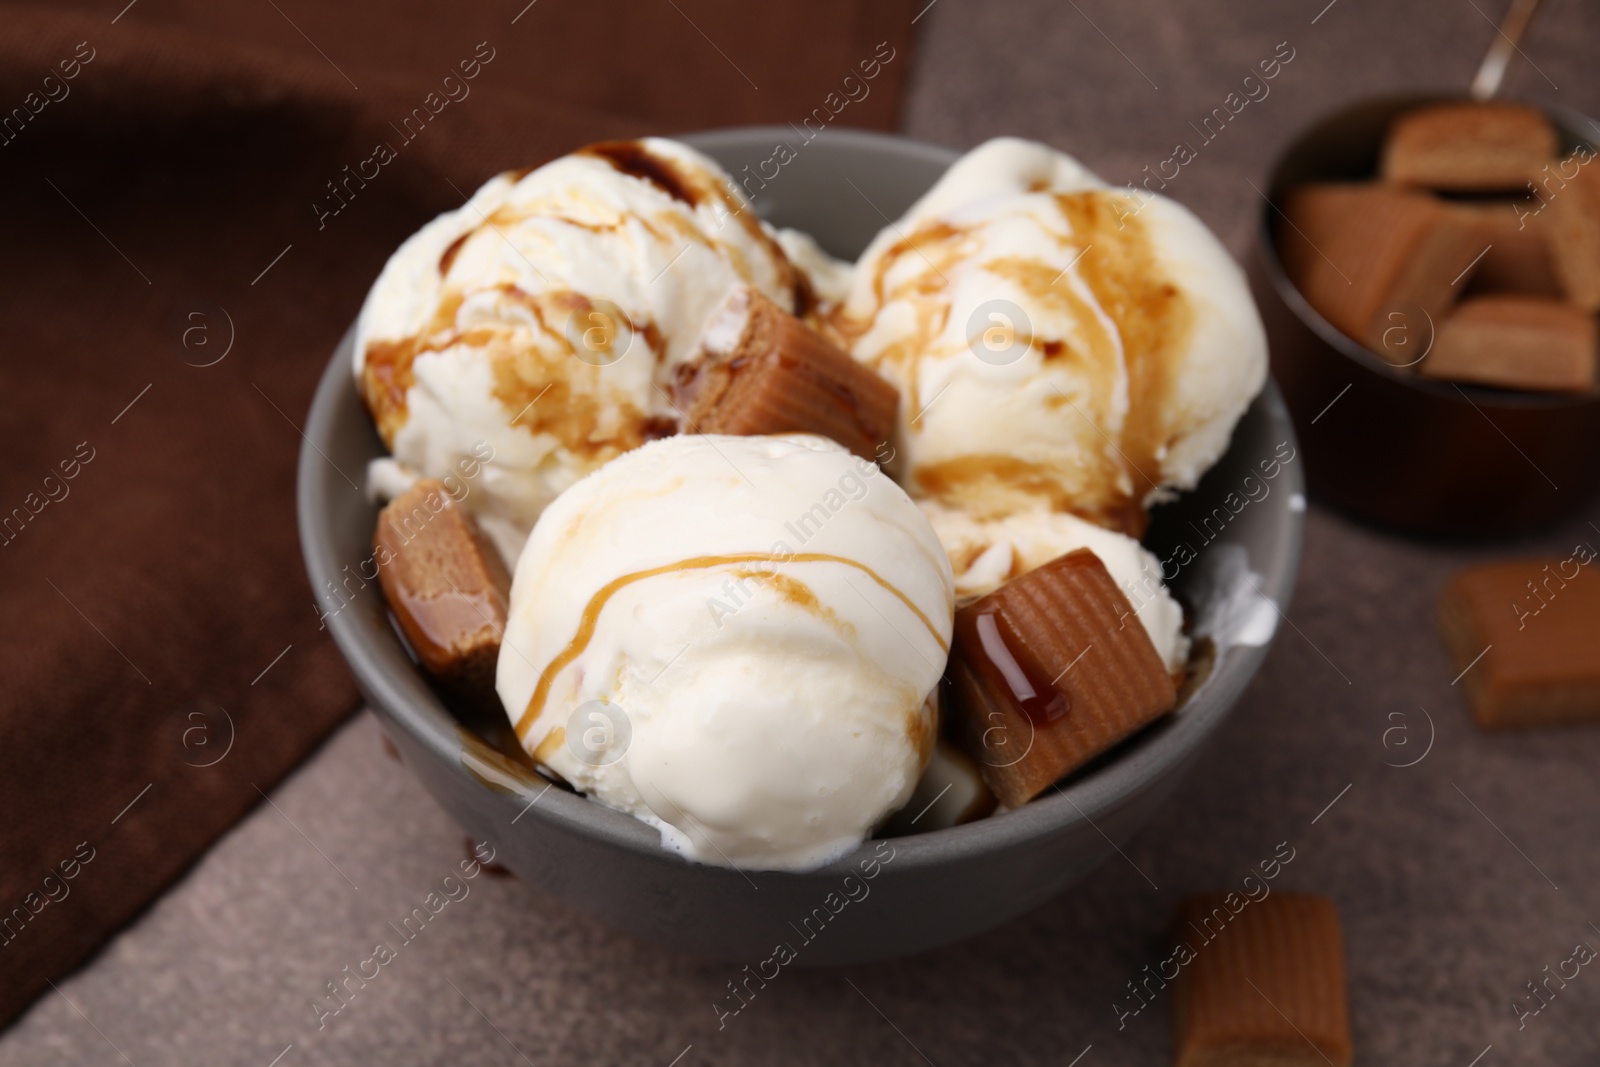 Photo of Scoops of ice cream with caramel sauce and candies on textured table, closeup